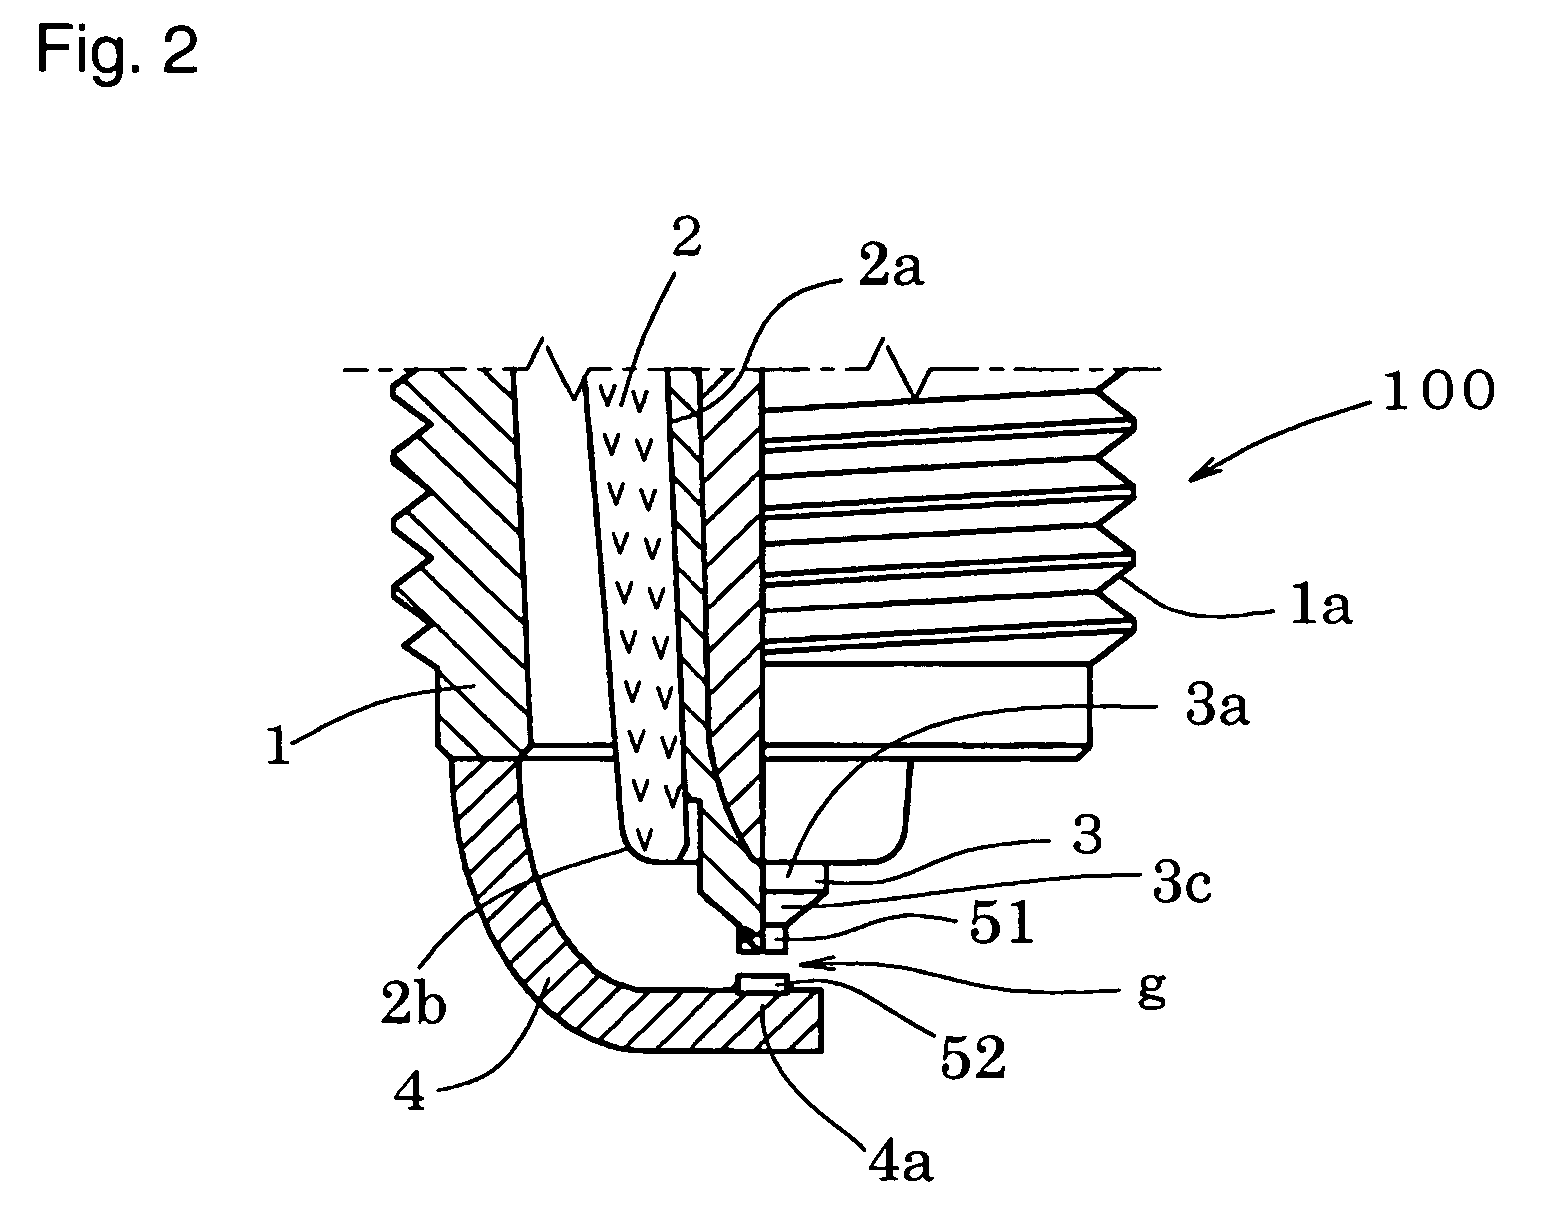 Method for manufacturing noble metal electric discharge chips for spark plugs